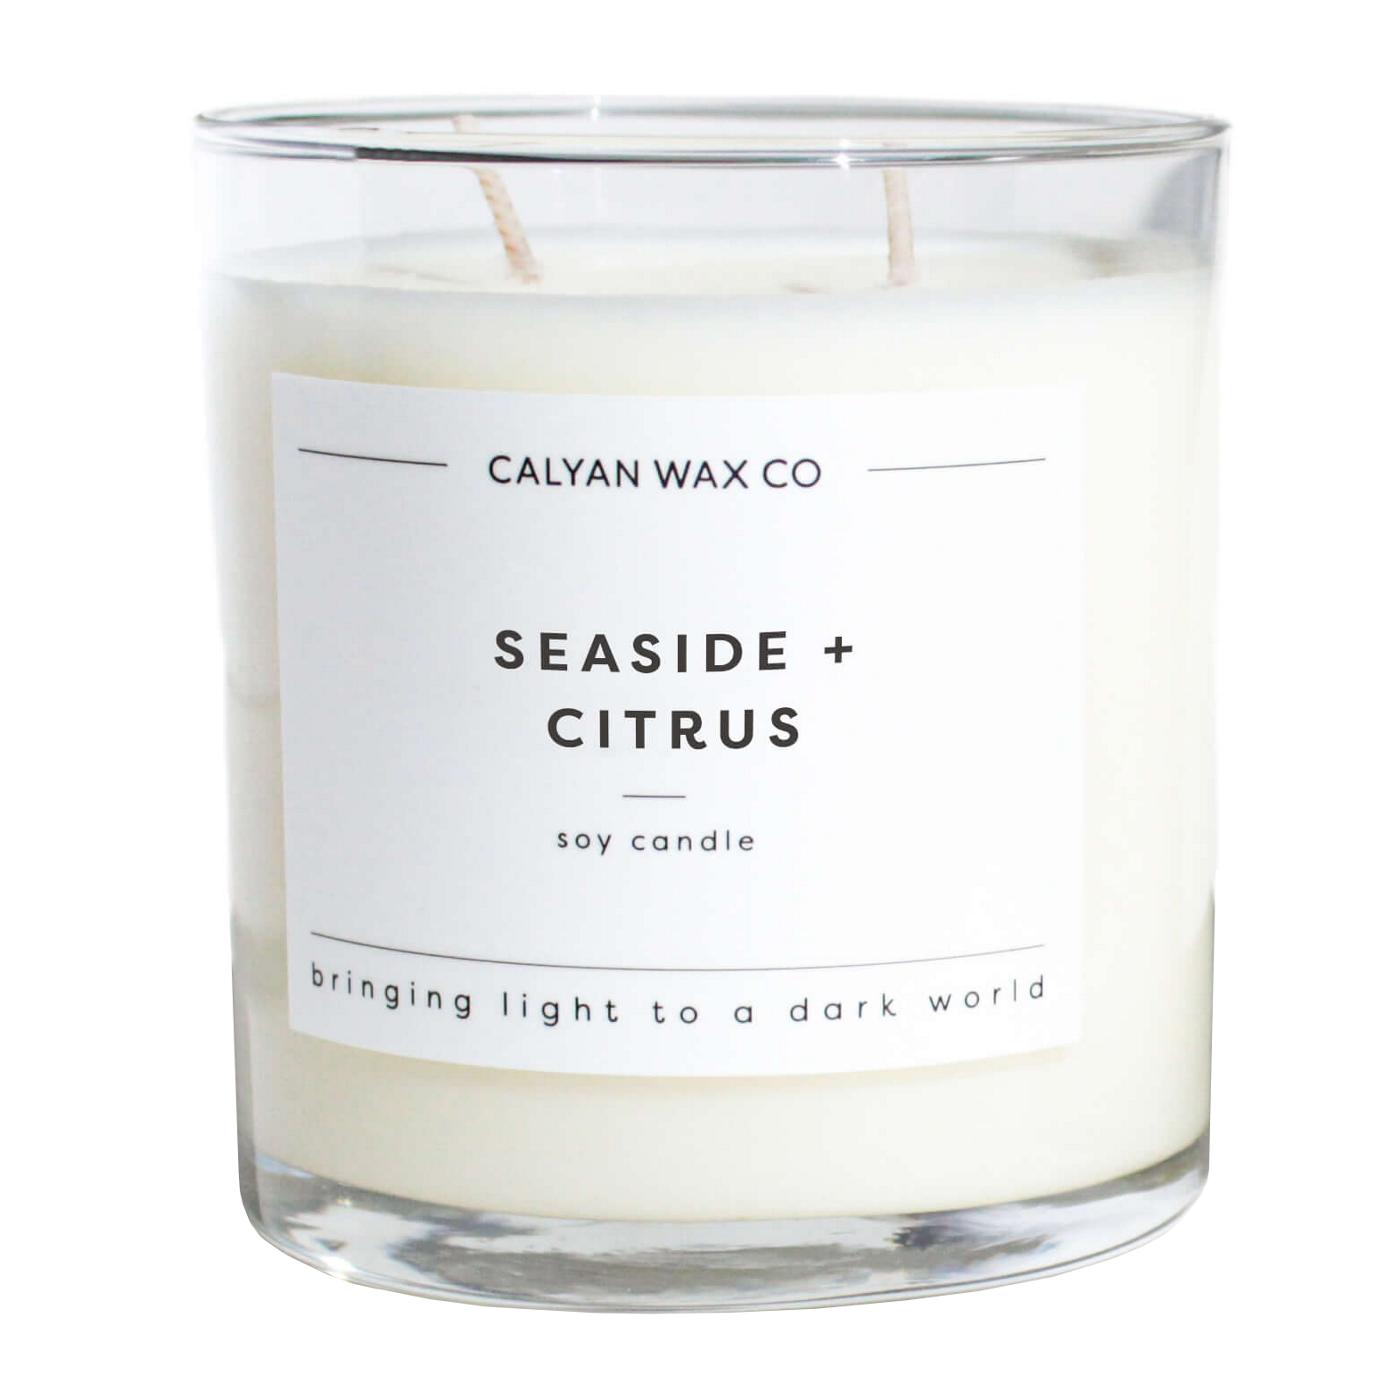 Calyan Wax Co. Seaside + Citrus Scented Soy Candle; image 1 of 3